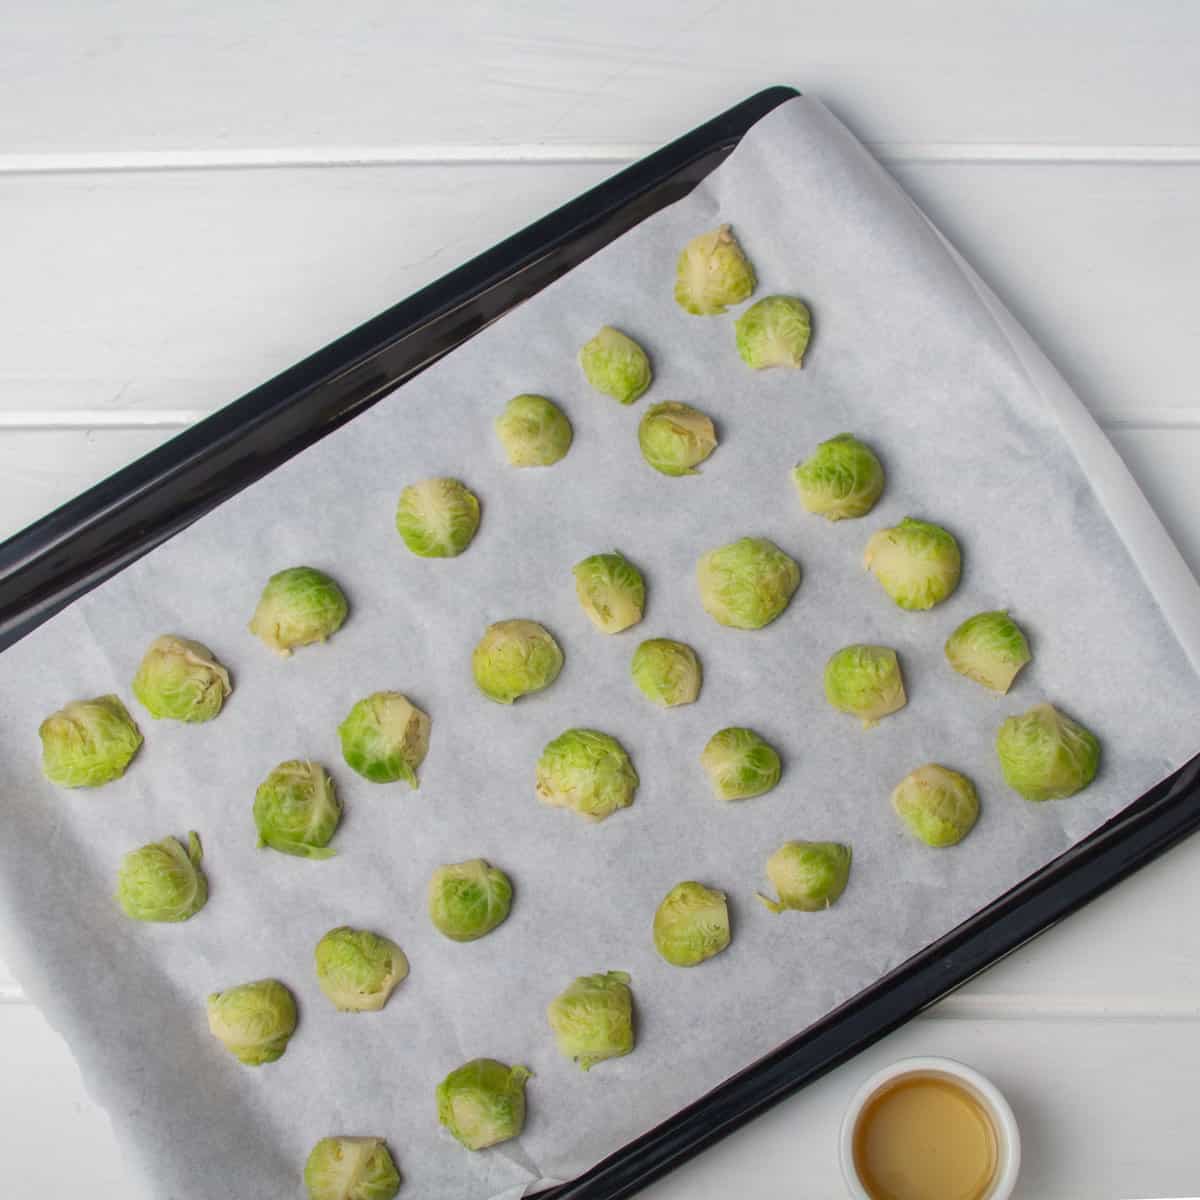 Halved brussel sprouts spread evenly on a parchment-lined baking sheet. 